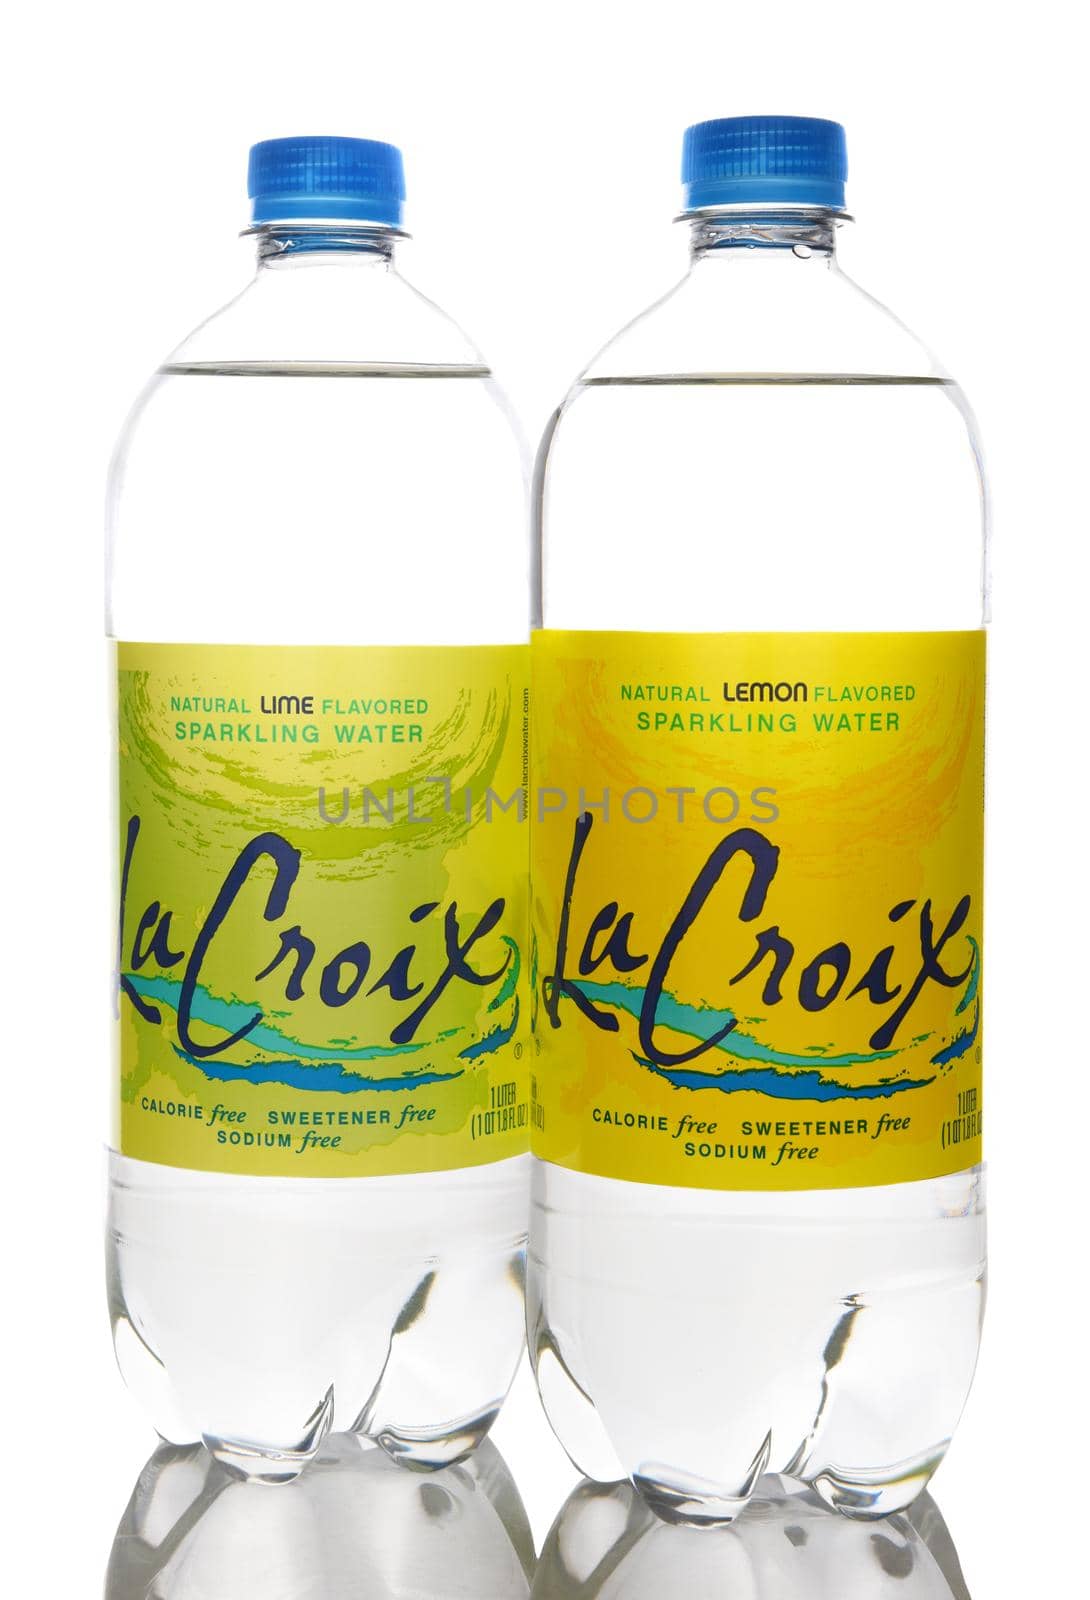 IRVINE, CALIFORNIA - 9 OCT 2019: Two bottles of La Croix Flavored Sparkling Water by sCukrov